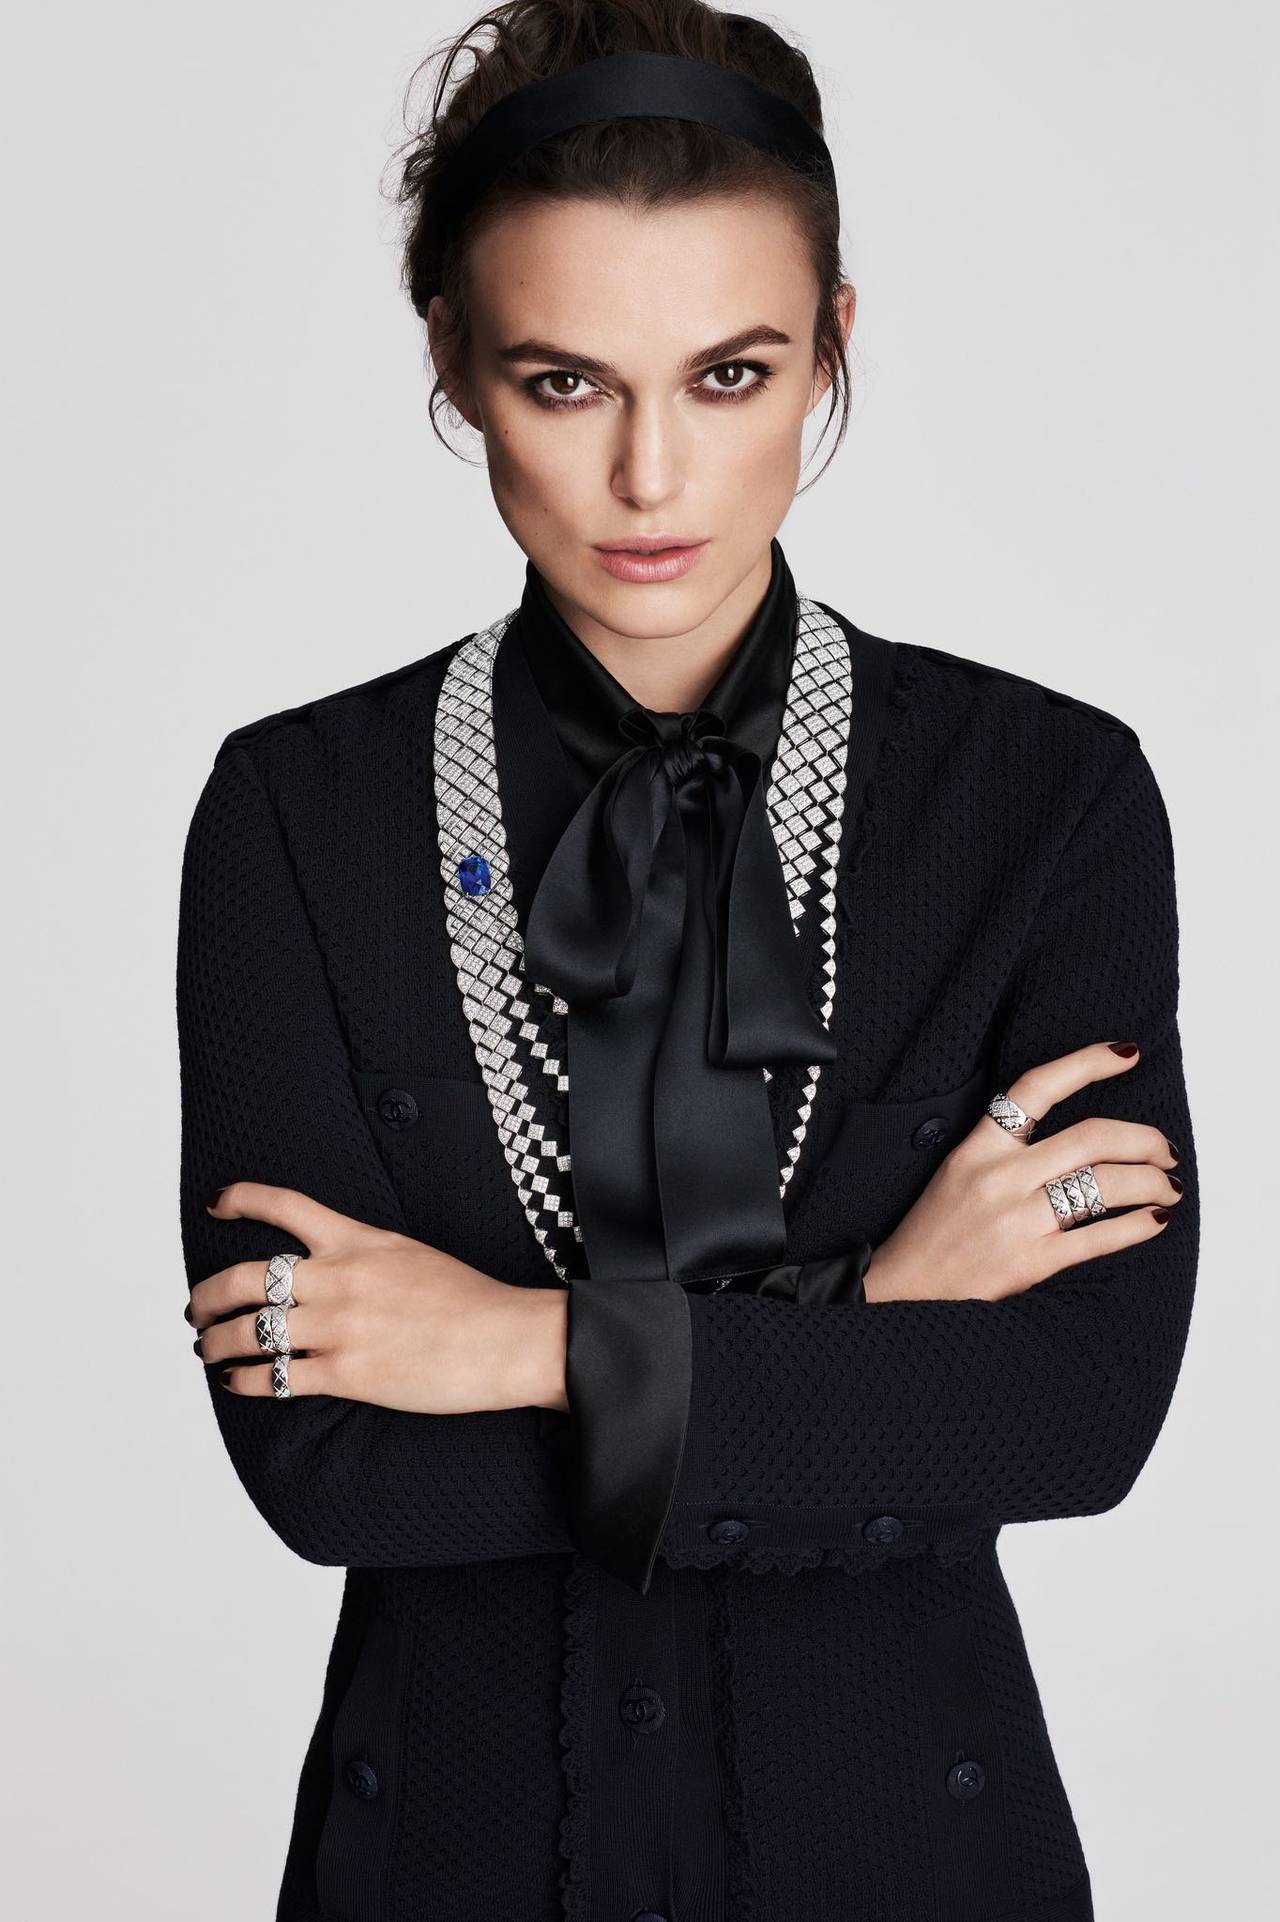 Keira Knightey is Face of CHANEL Fine Jewellery Collection COCO